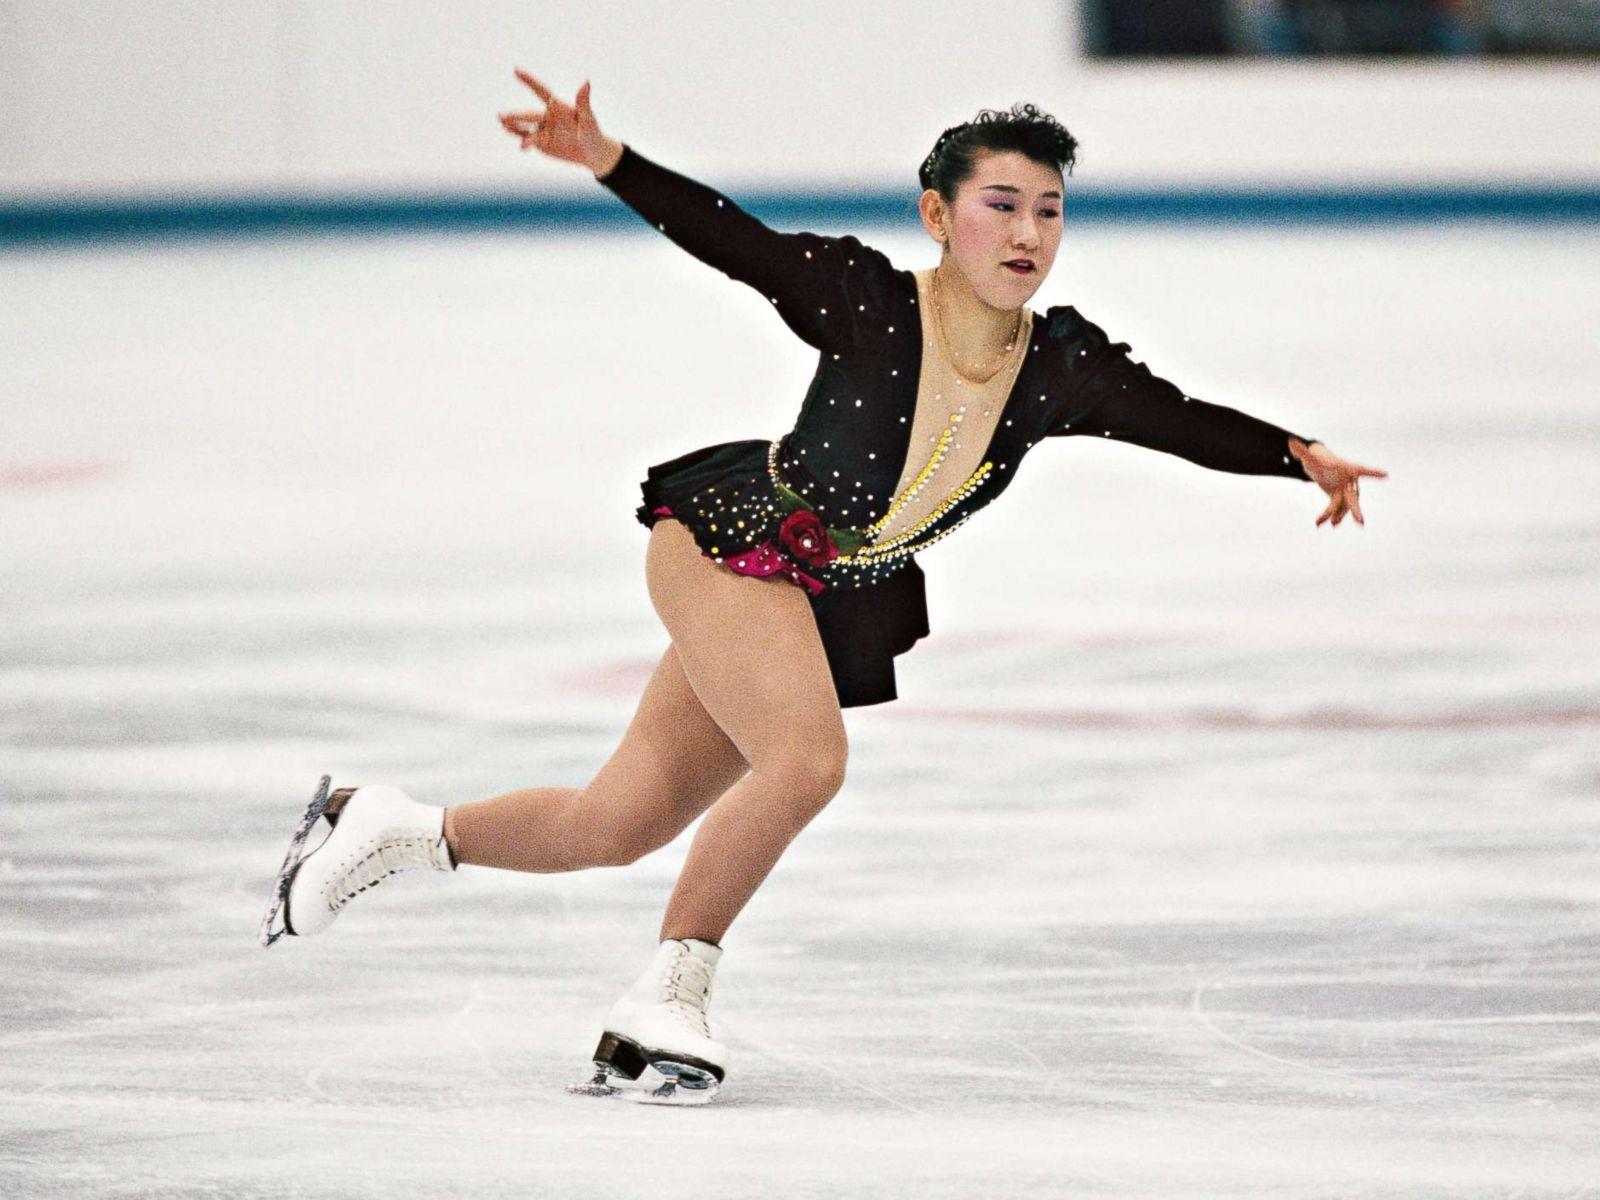 US female figure skater 1 of only 3 in Olympic history to